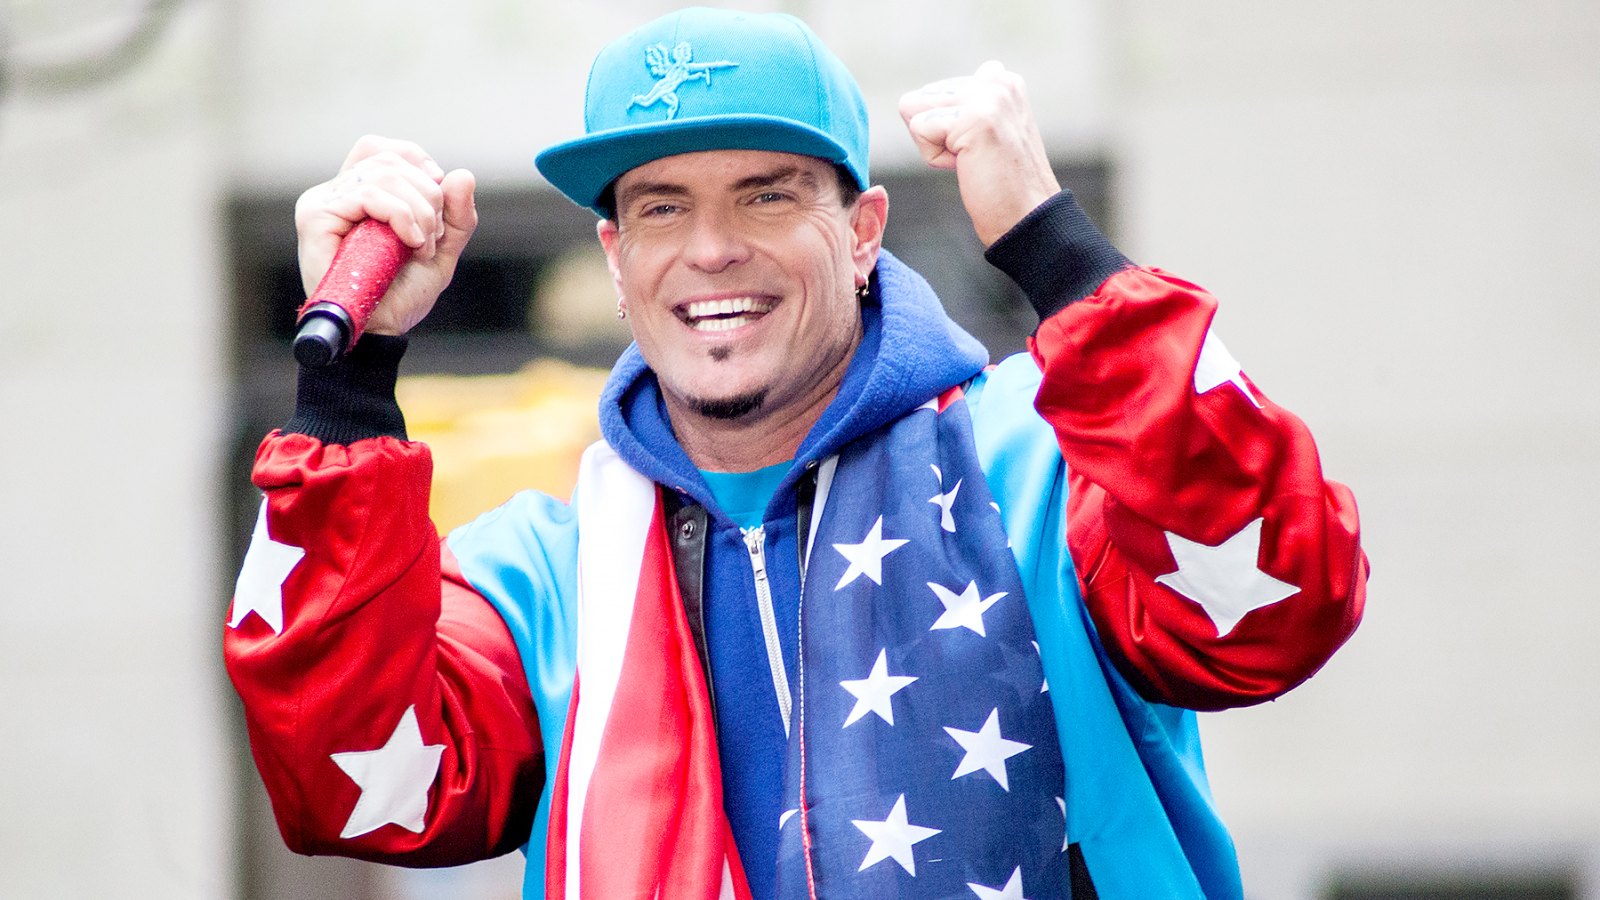 Vanilla Ice performs onstage during I Love The 90's Concert Tour Performs On NBC's "Today" at Rockefeller Plaza on April 29, 2016 in New York City.